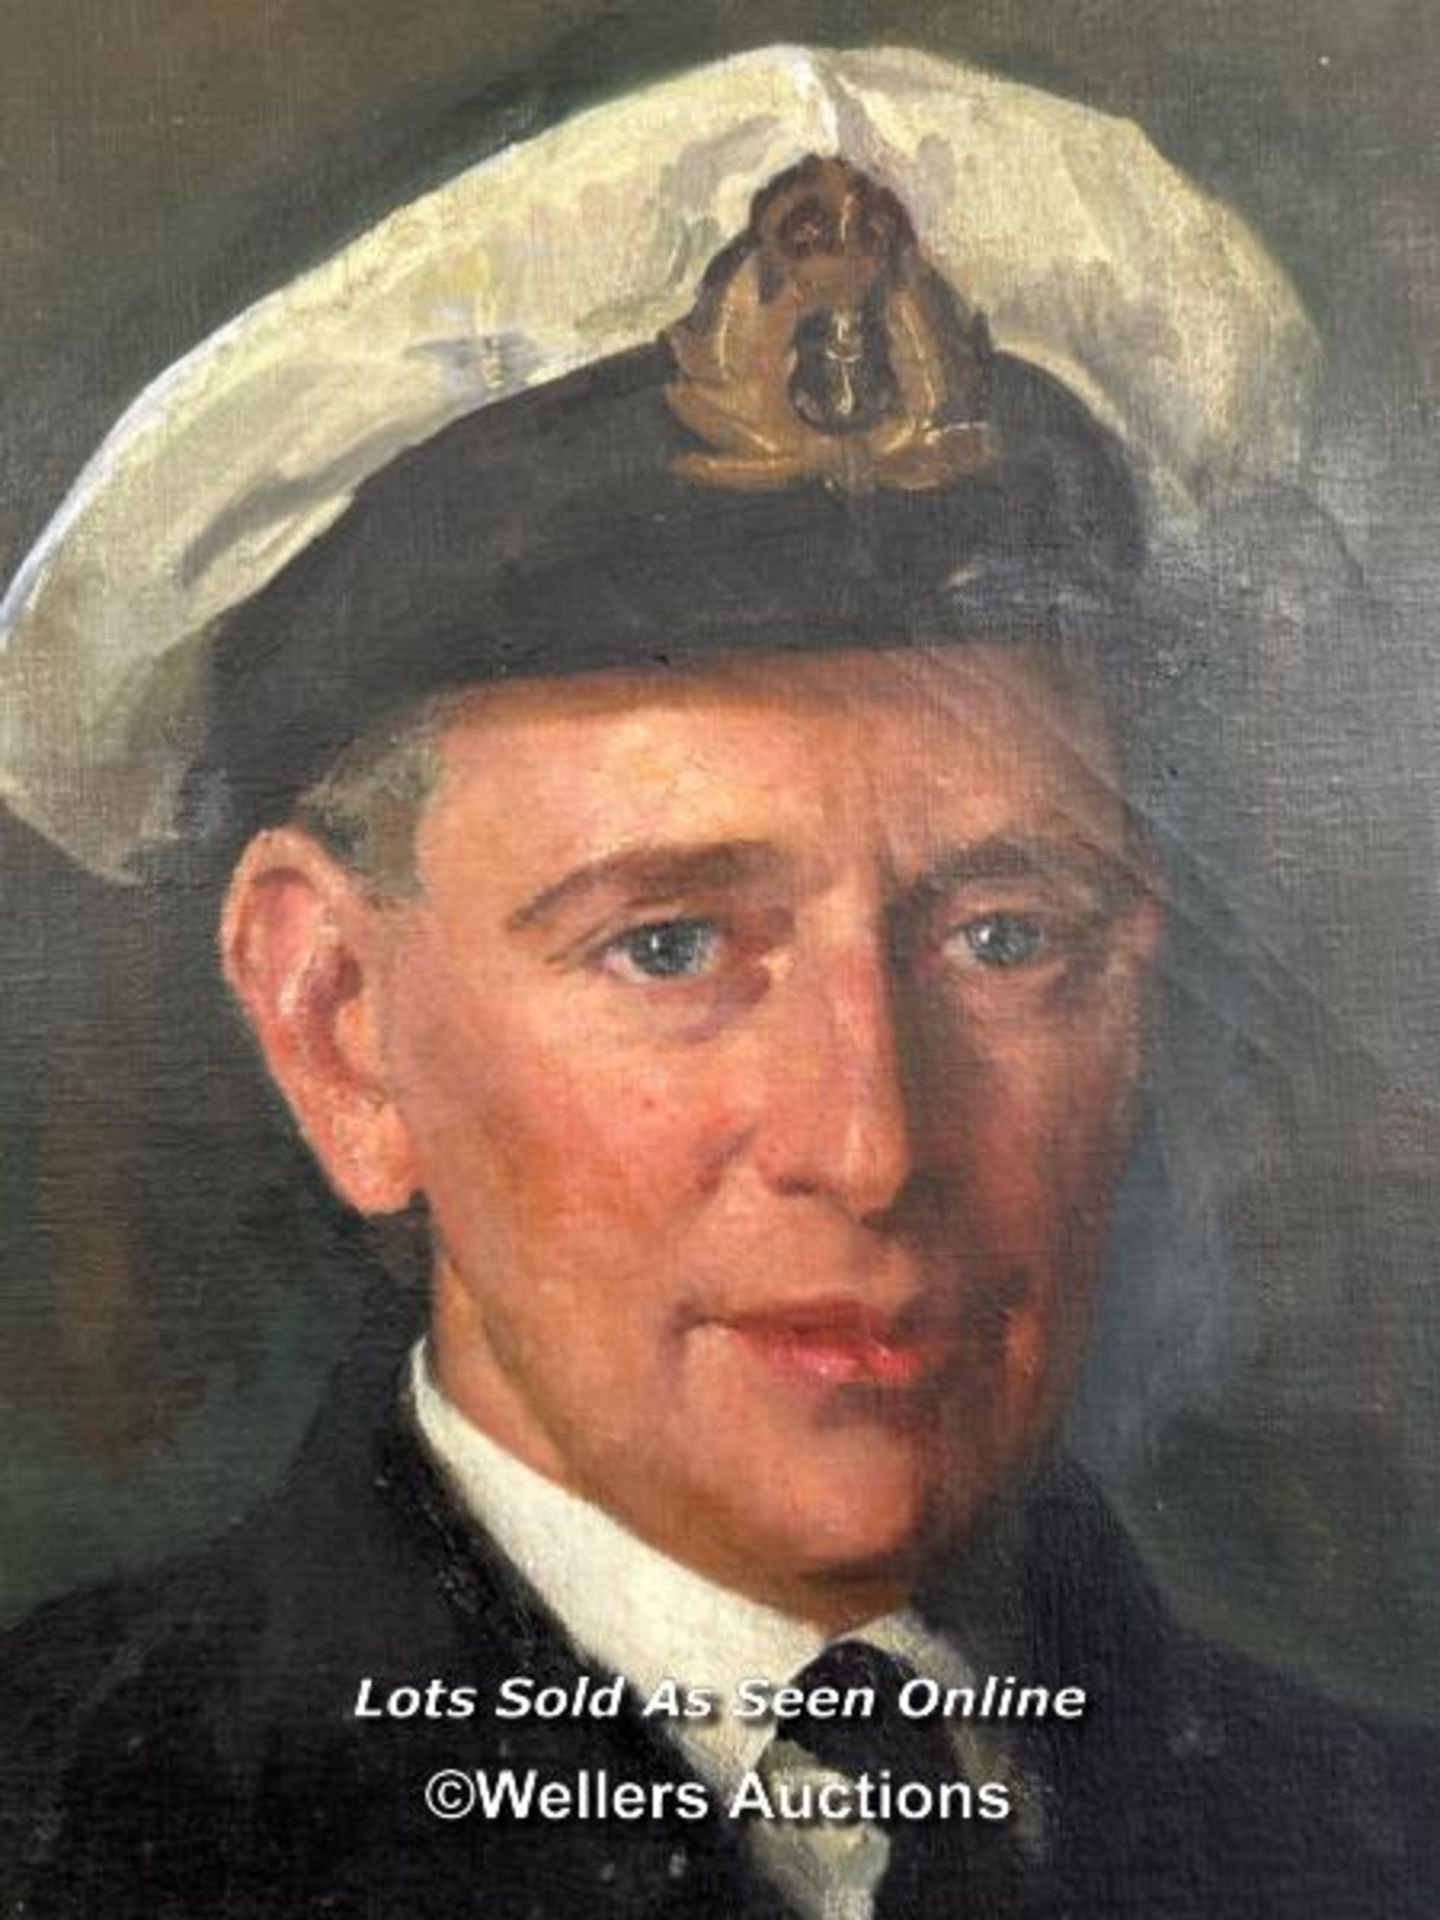 OIL ON CANVAS DEPICTING A LIEUTENANT IN THE ROYAL NAVY DATED 1932, 63 X 76CM - Image 2 of 5